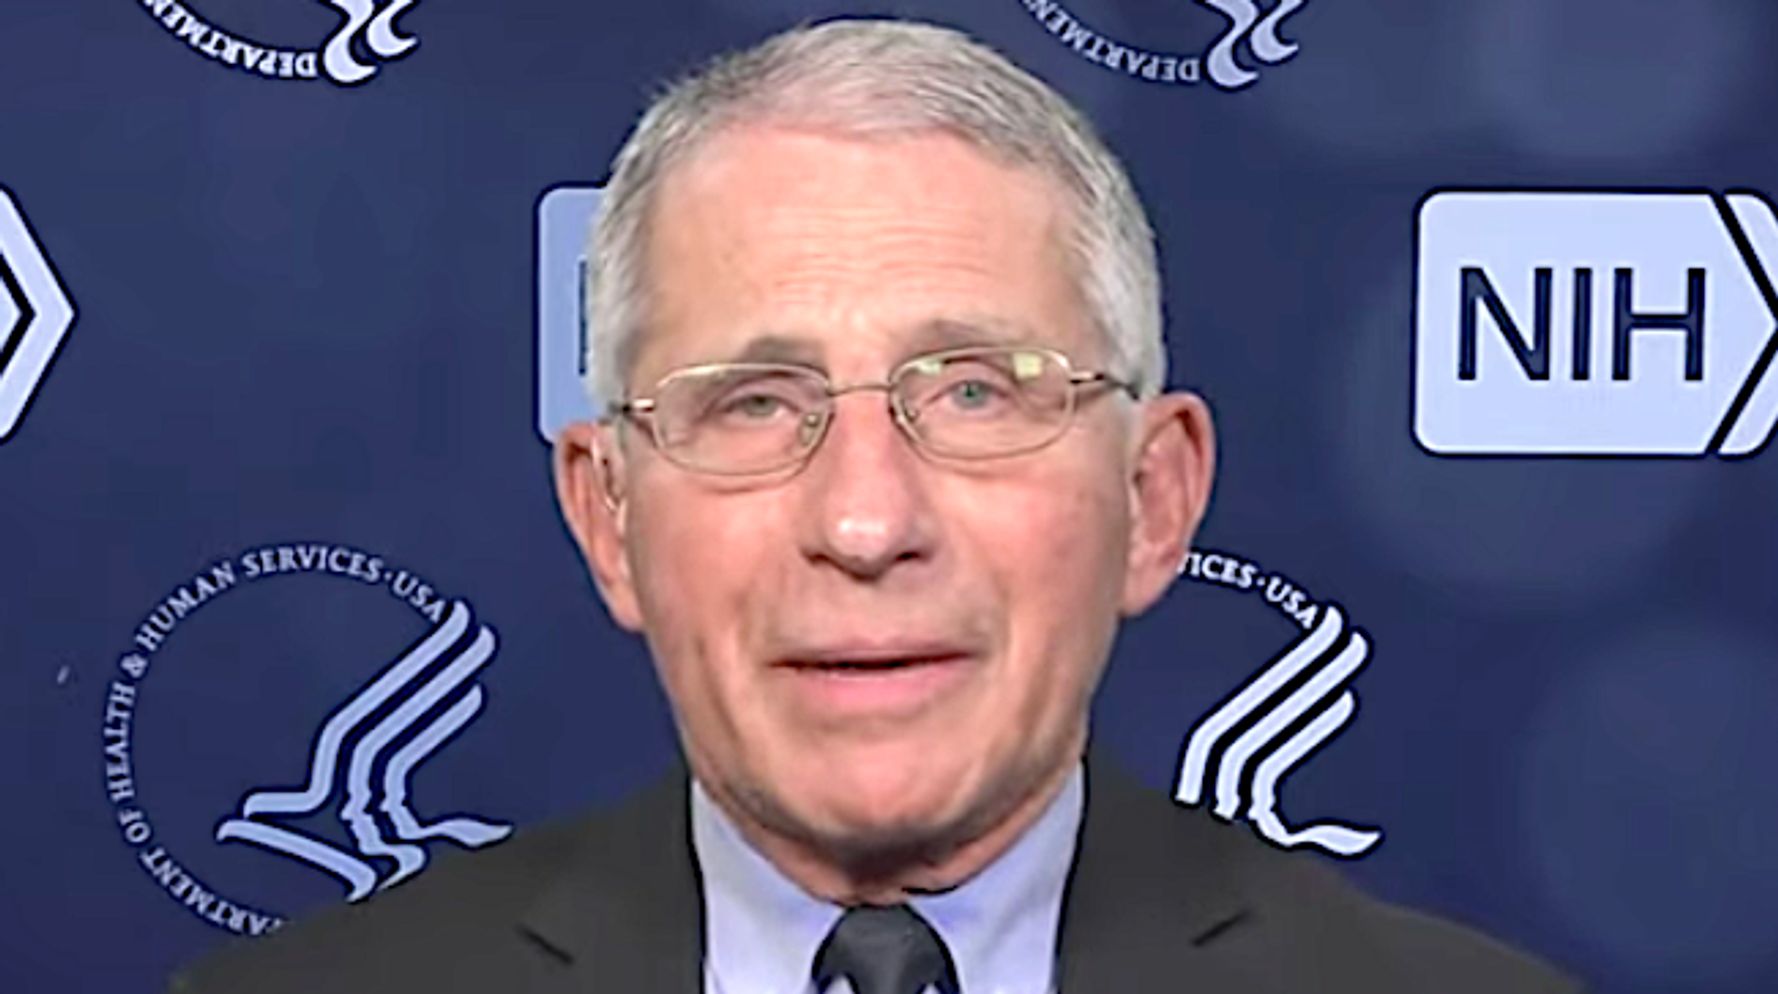 Fauci Blames Trump Administration’s ‘Mixed Messages’ For Unimaginable COVID-19 Toll